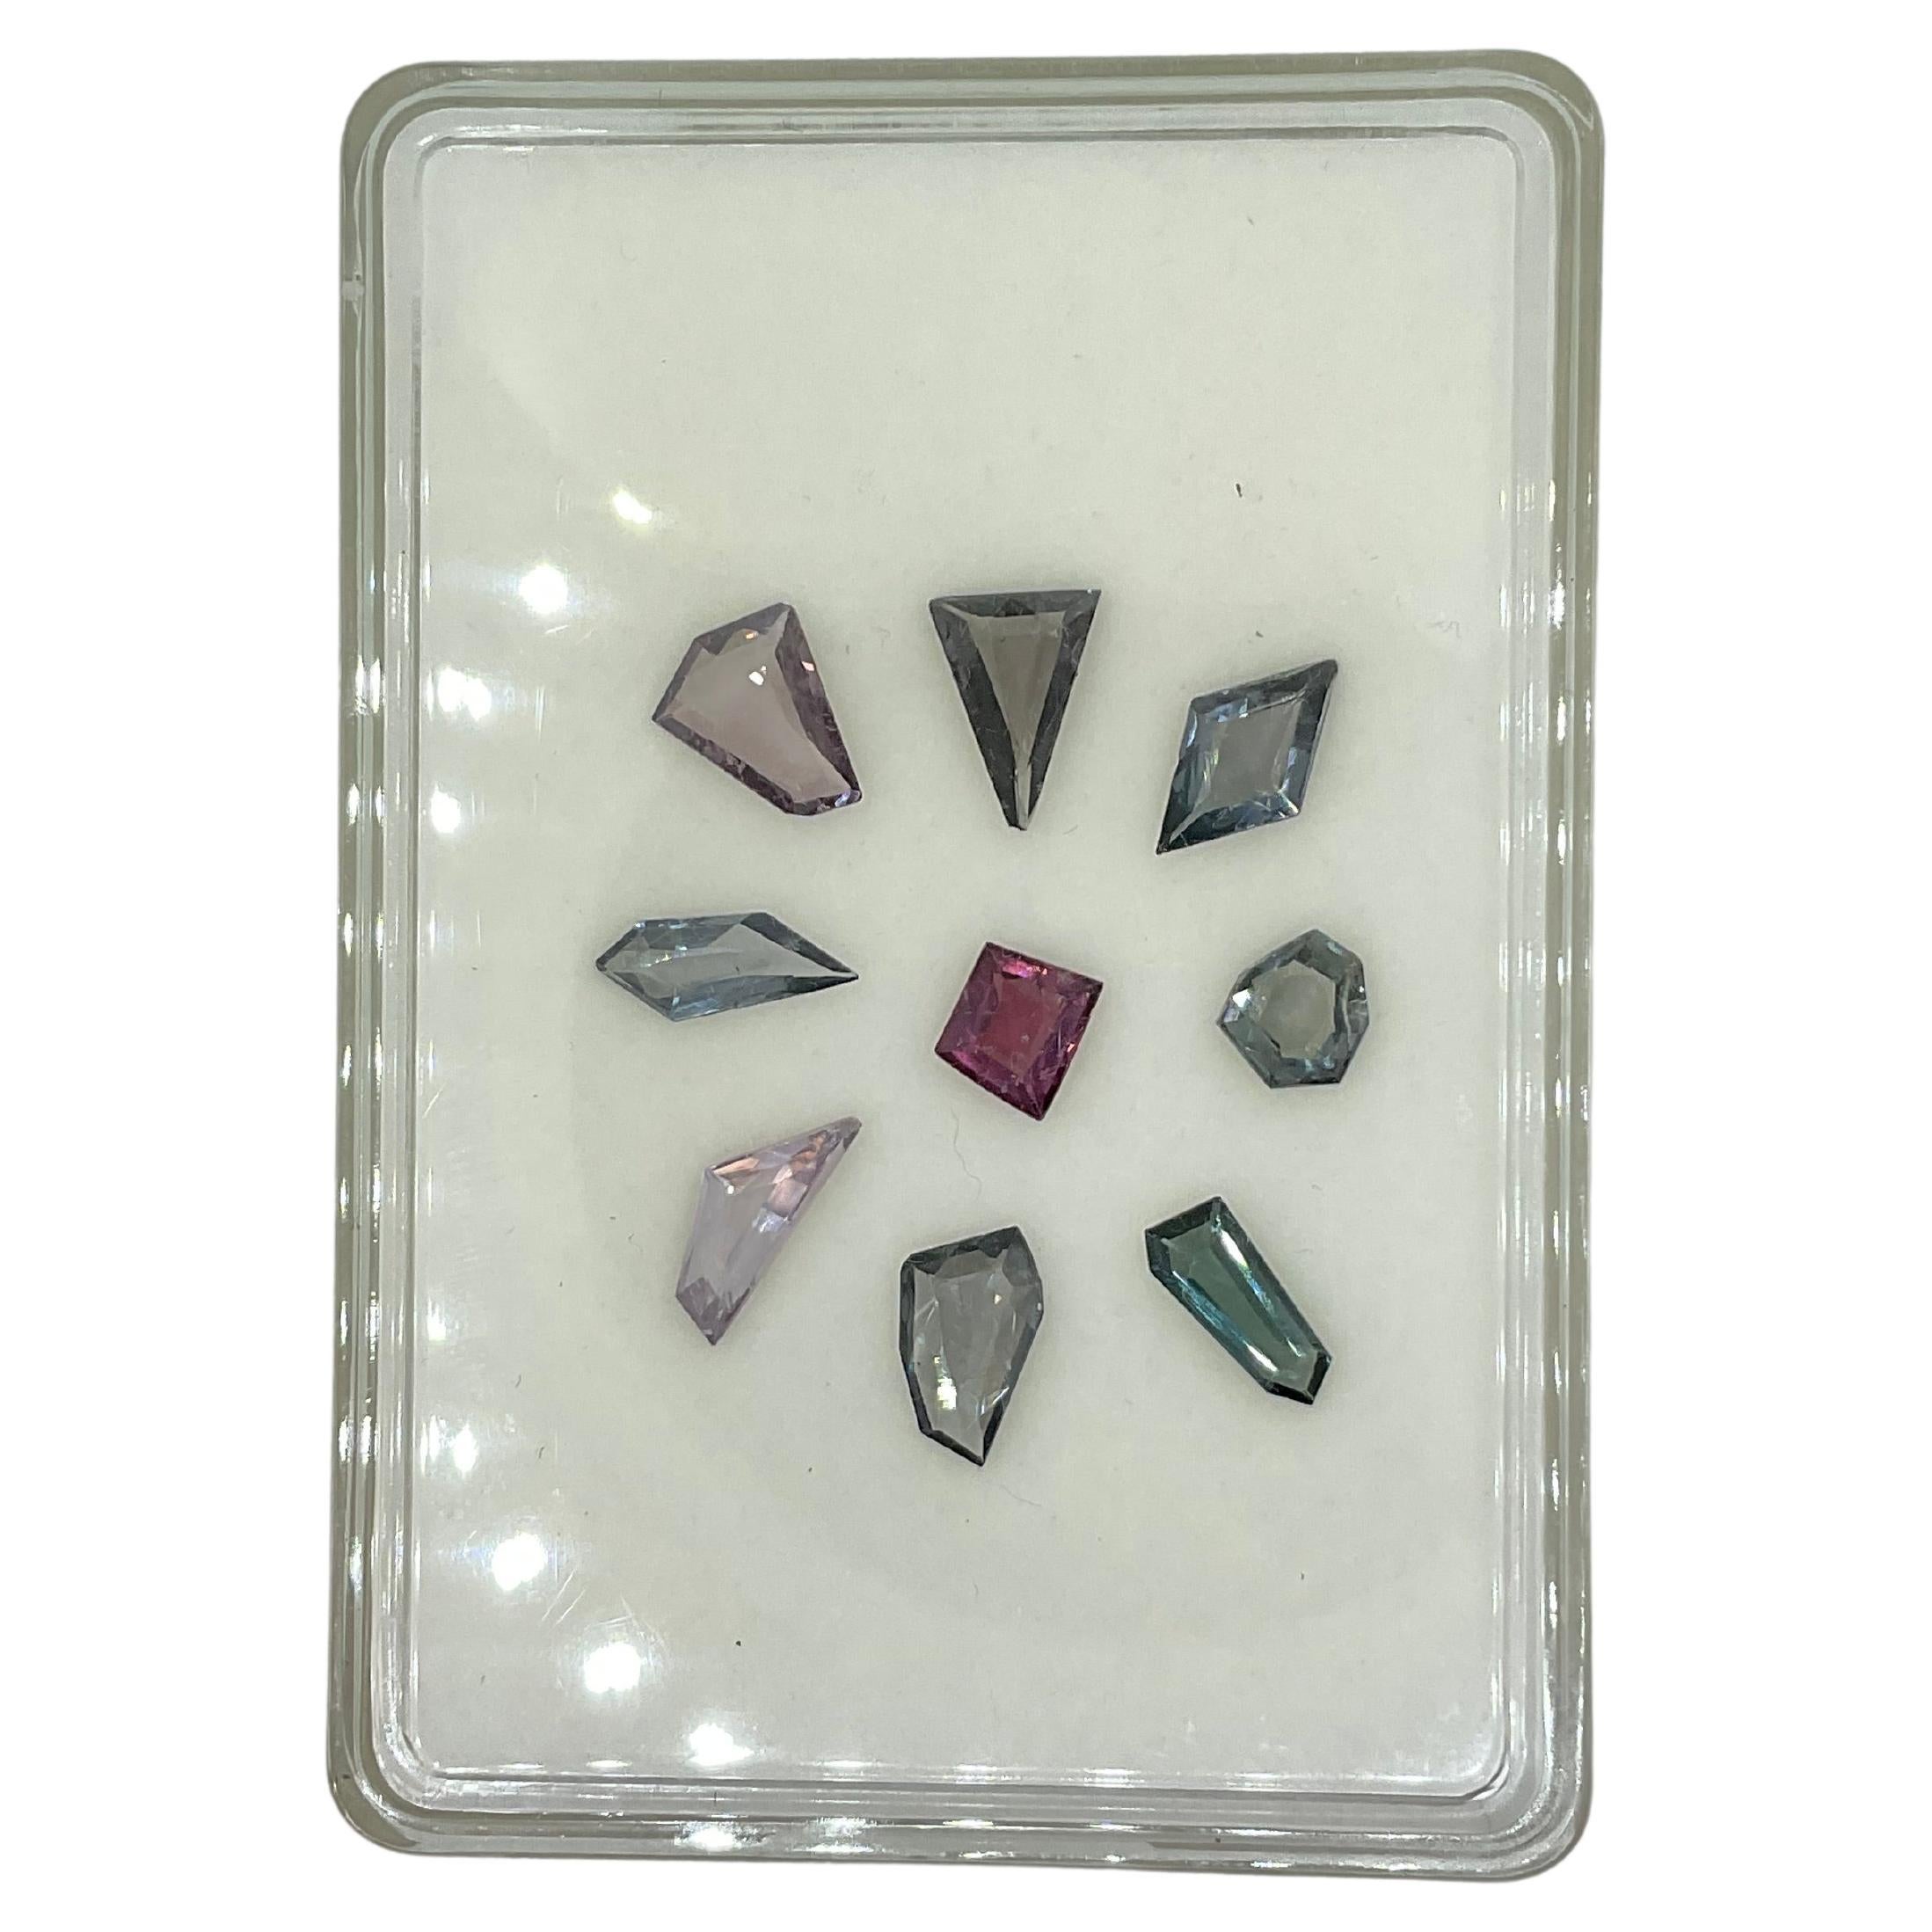 12.20 Carats Grey & Pink Spinel Fancy Cut Stone Natural Gem For Top Fine Jewelry

Gemstone: Spinel
Weight: 12.20 Carats
Size: 7x7 TO 7x11 MM
Pieces: 9
Shape: Fancy Cut stones